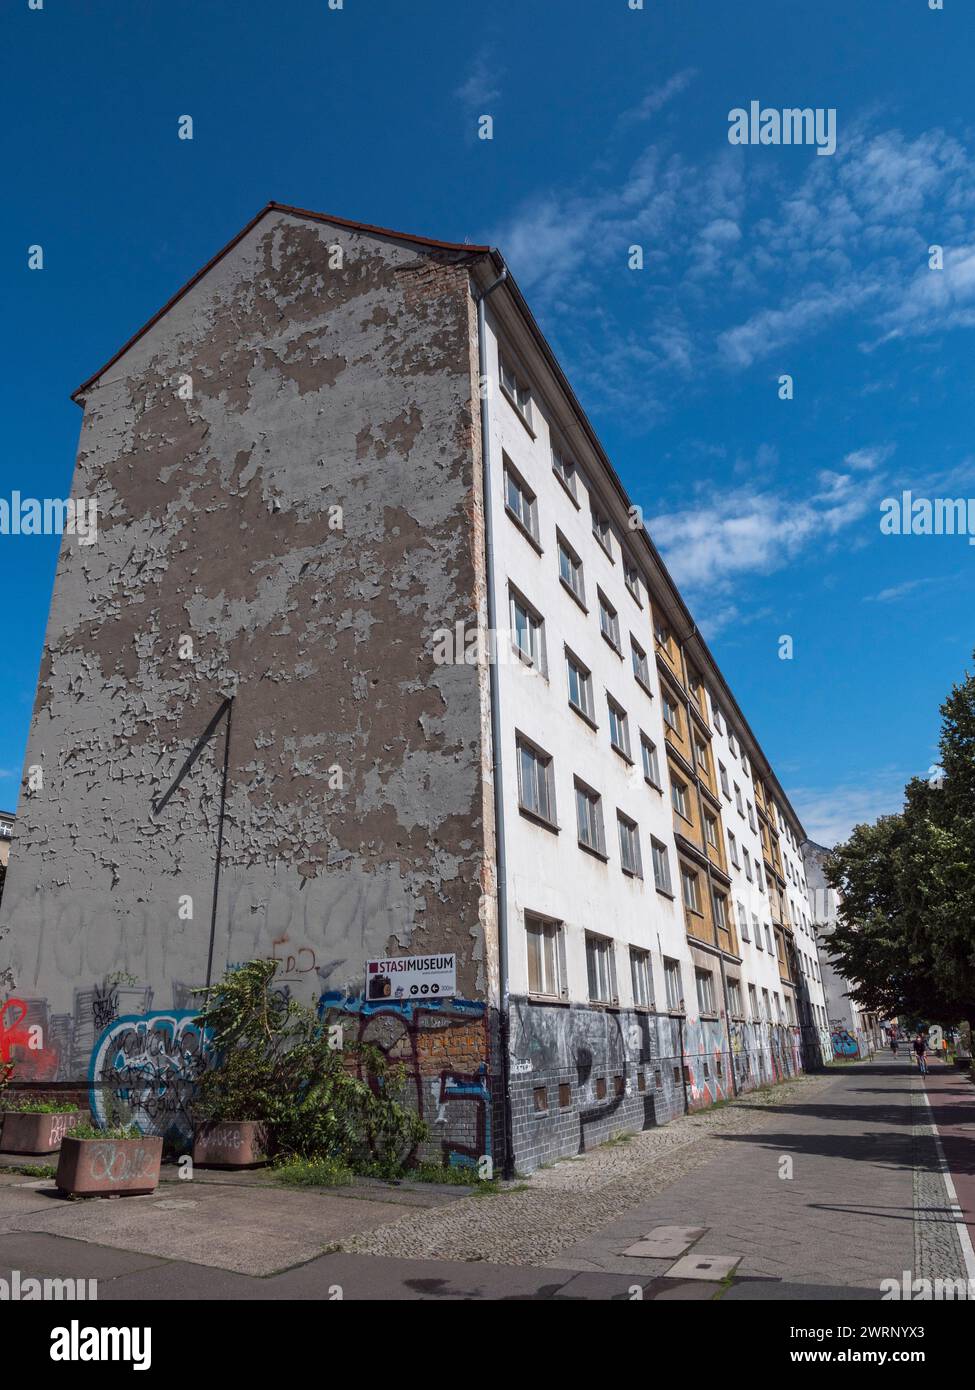 General view of the exterior of the Stasi Museum in Berlin, Germany. Stock Photo